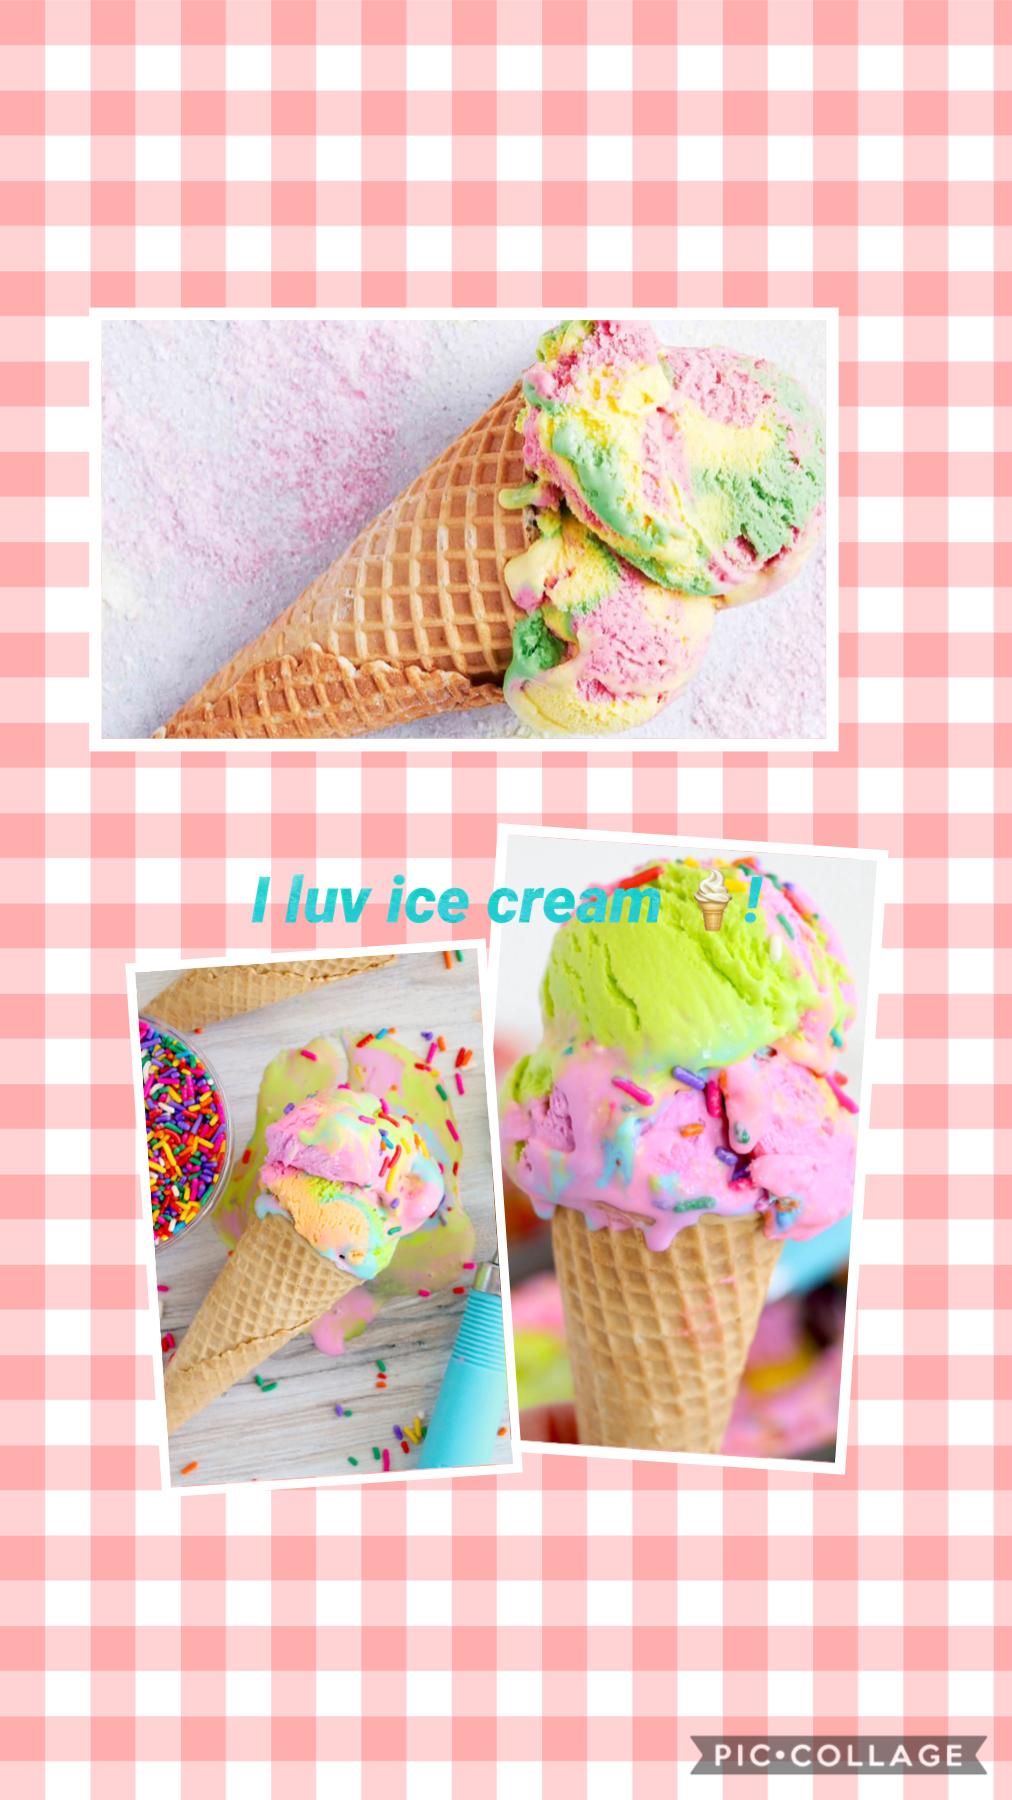 I love ice cream advertisement please check out my extras account